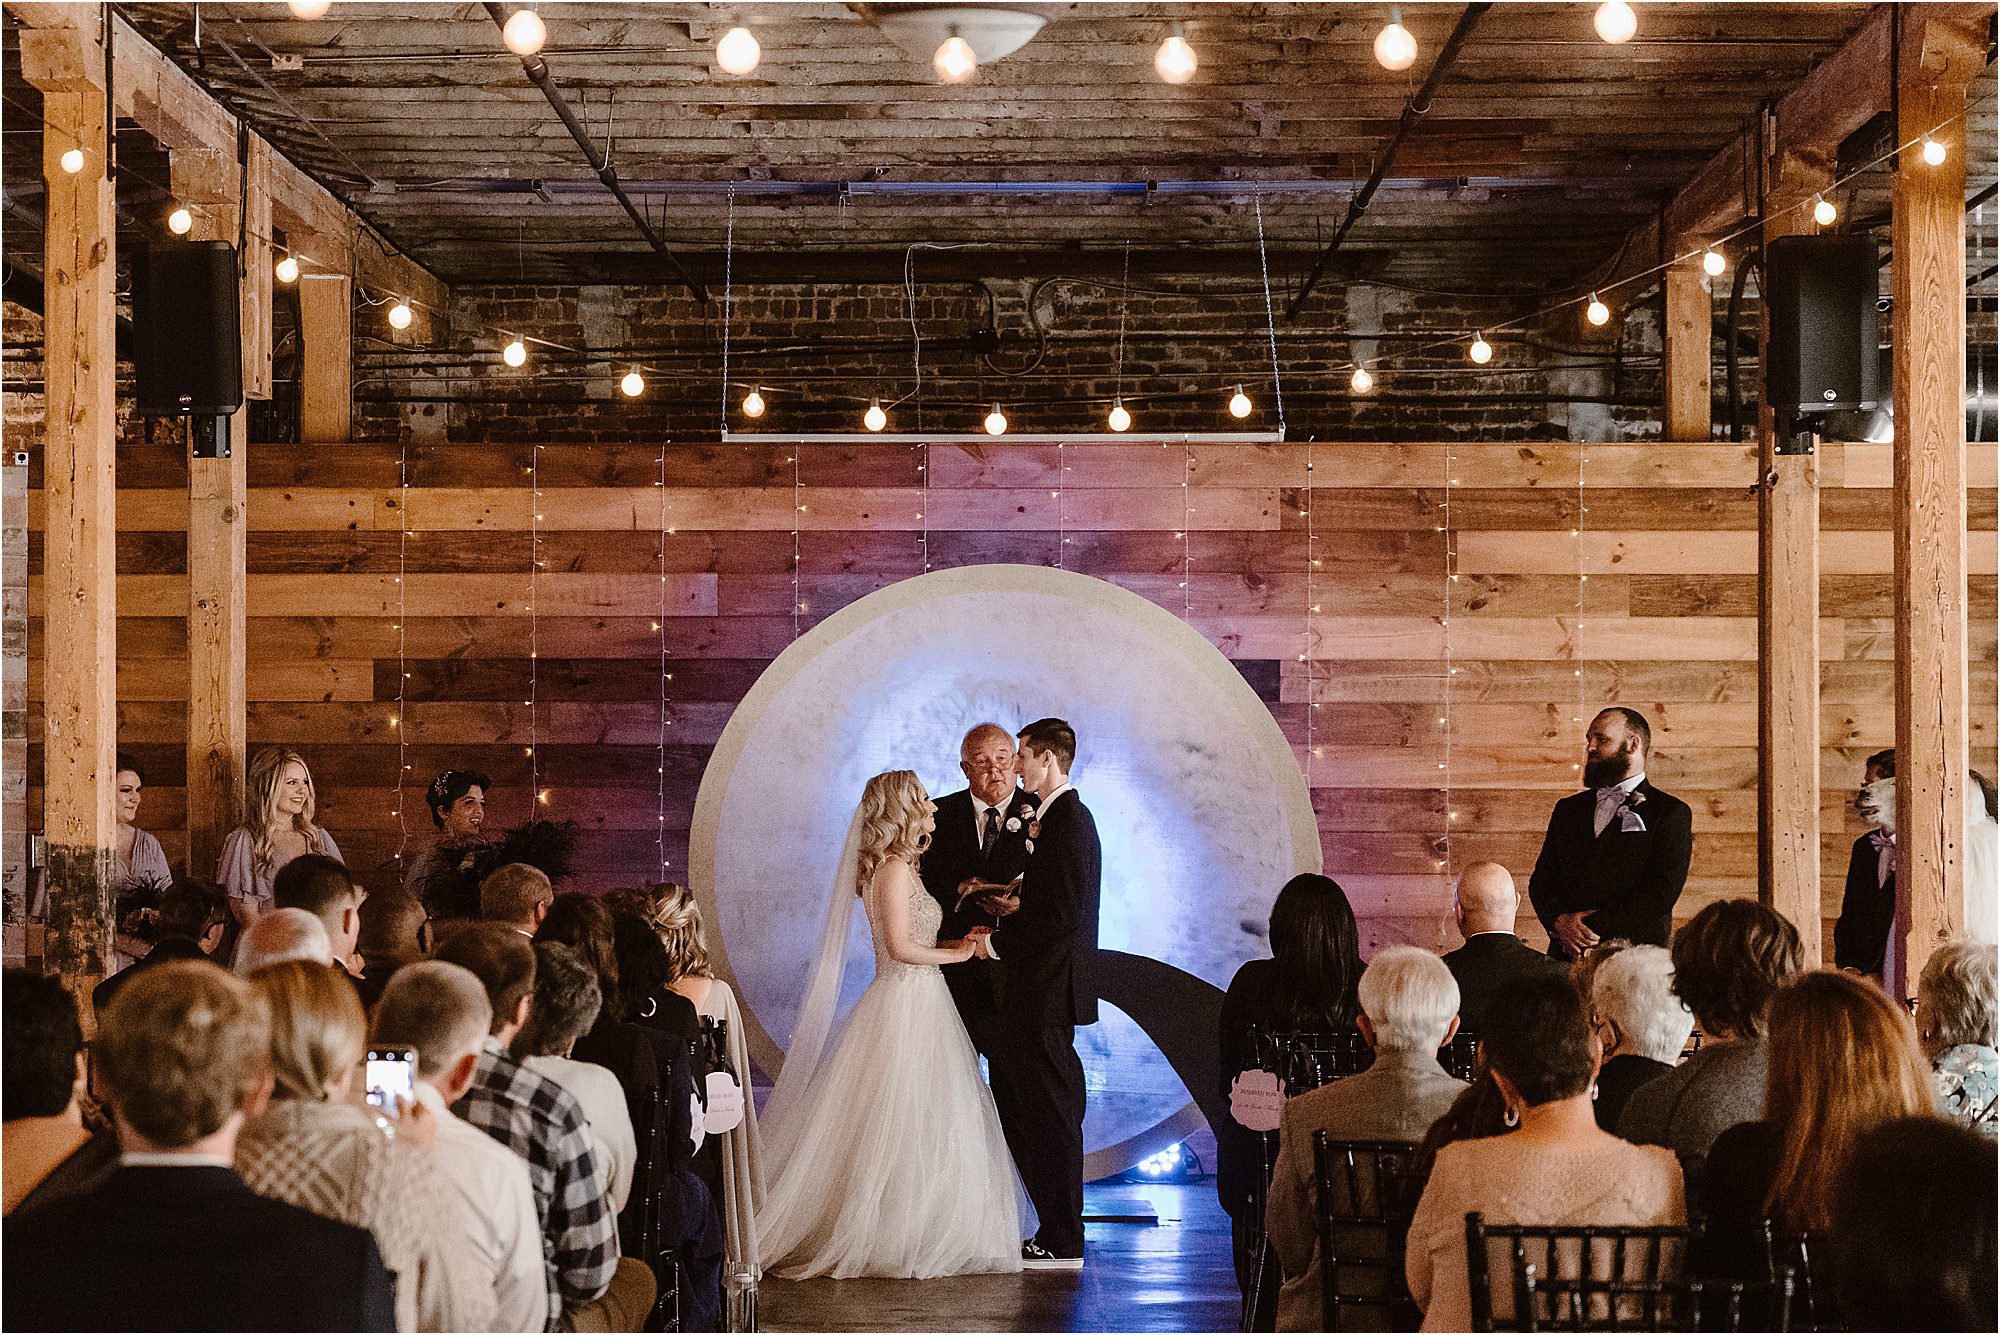 Nightmare Before Christmas Wedding at Old Woolen Mill in Tennessee